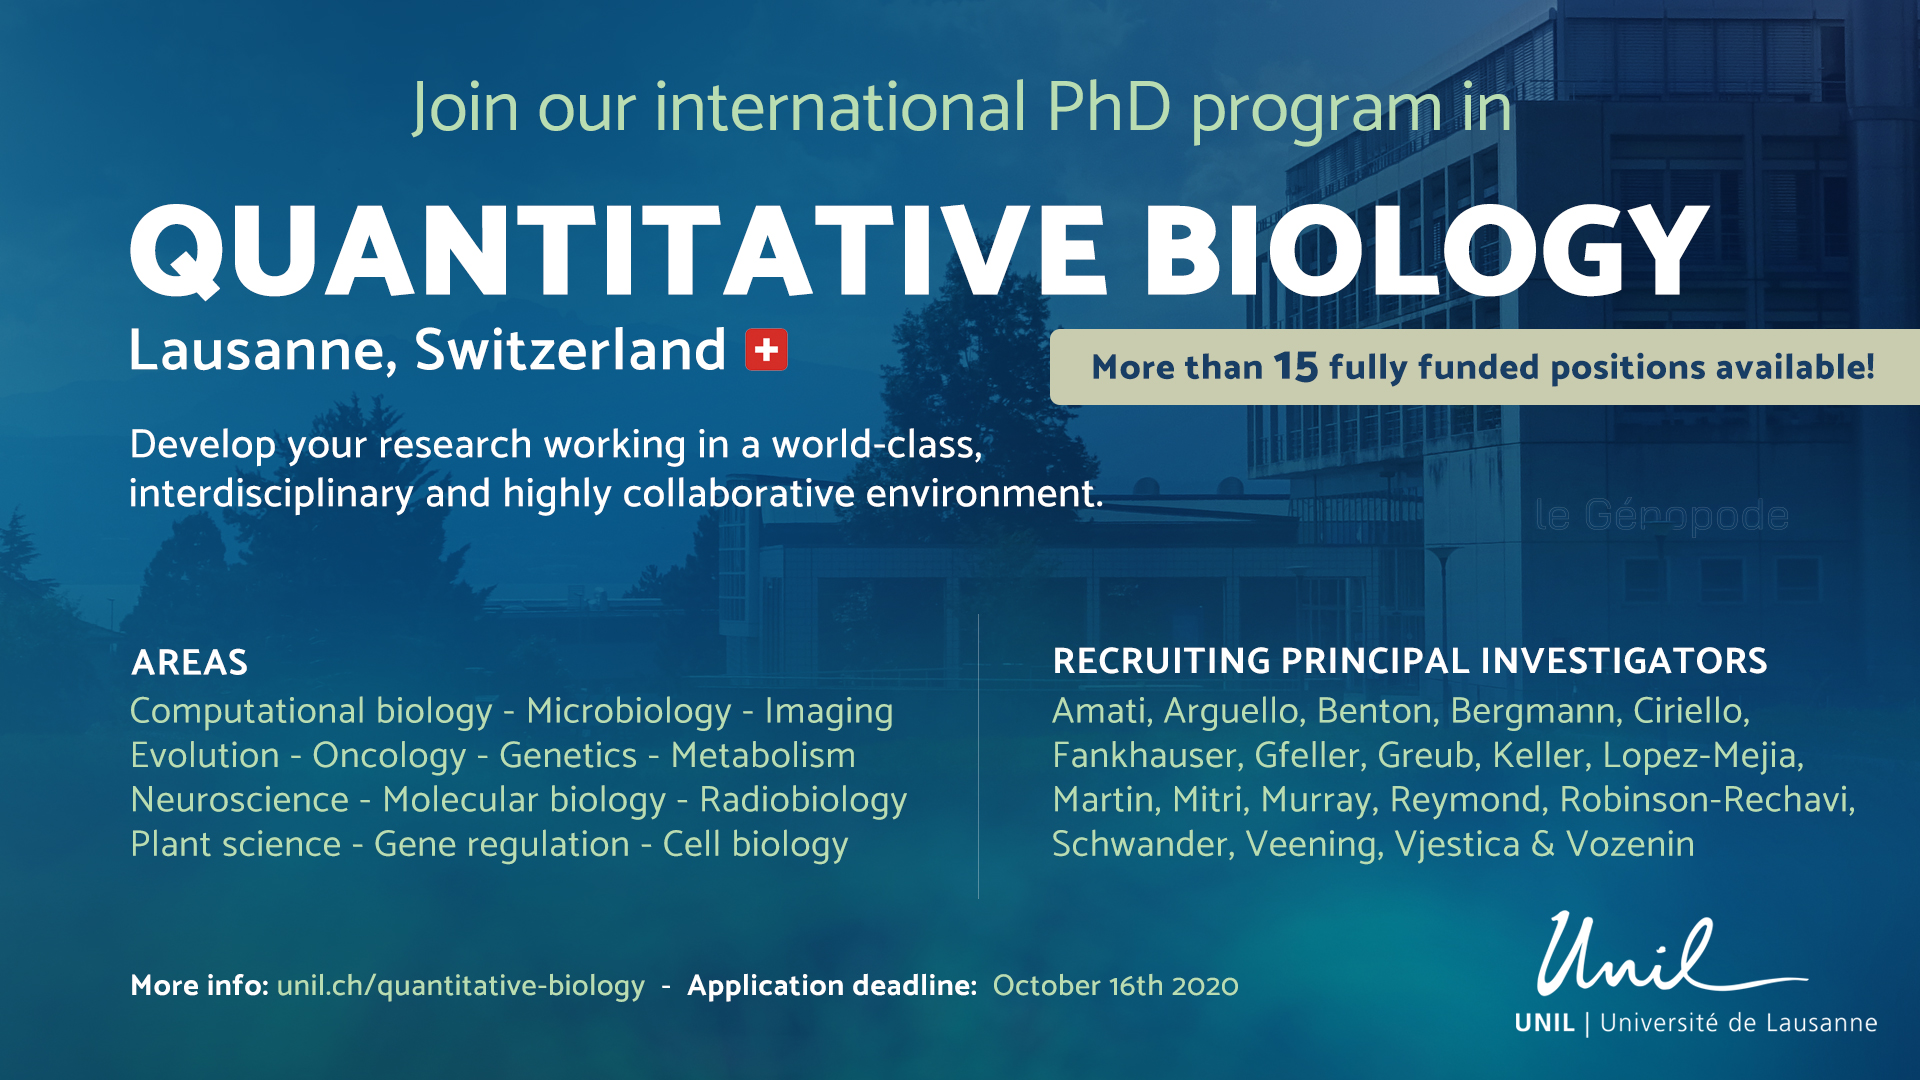 Over 15 fully funded PhD studentships in Quantitative Biology in Lausanne,  Switzerland